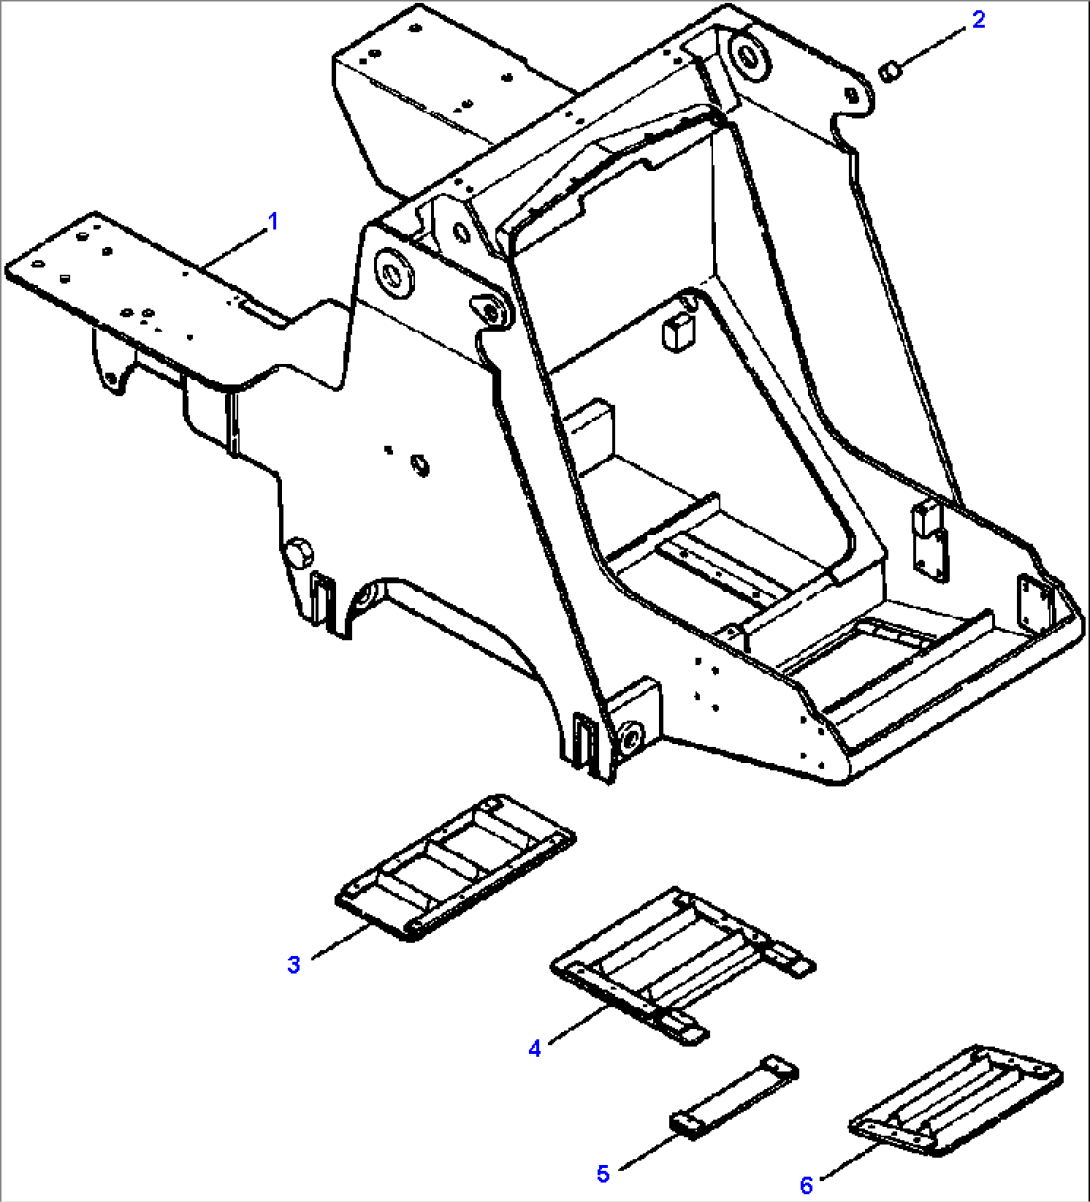 FRONT FRAME (WITHOUT ROPS CANOPY MOUNTS)